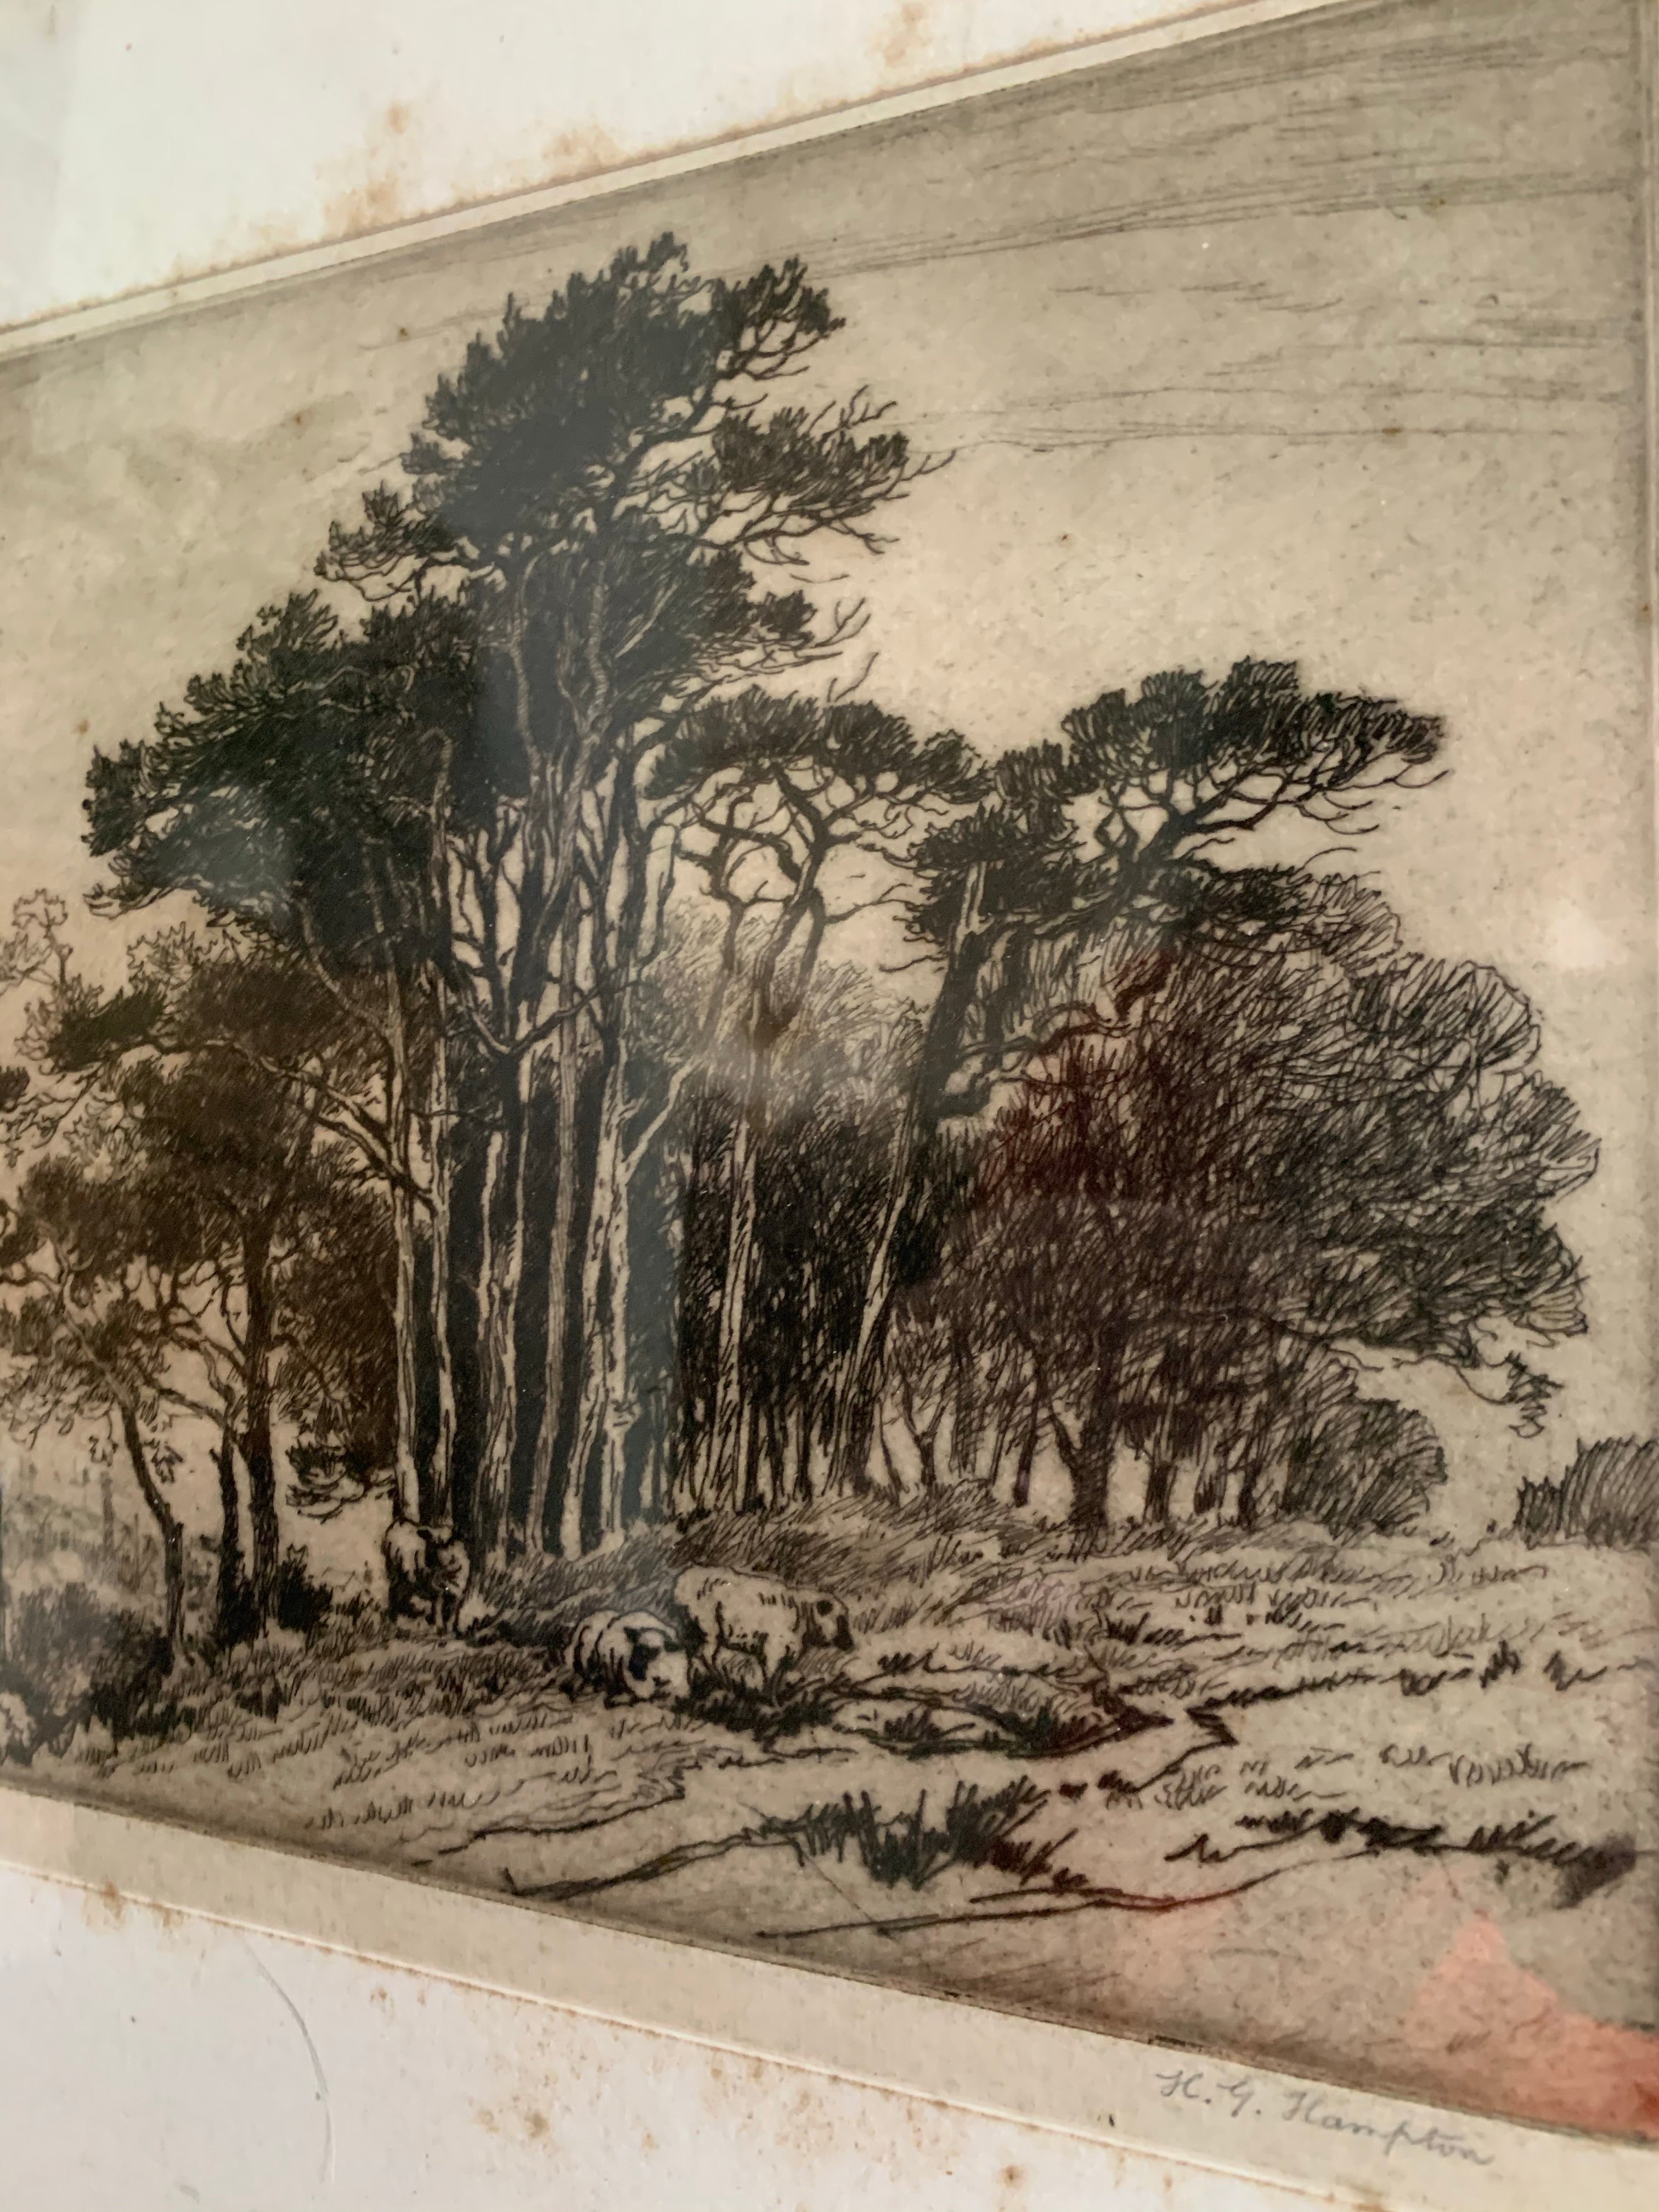 Antique Etching of Animals Sheltering under Trees